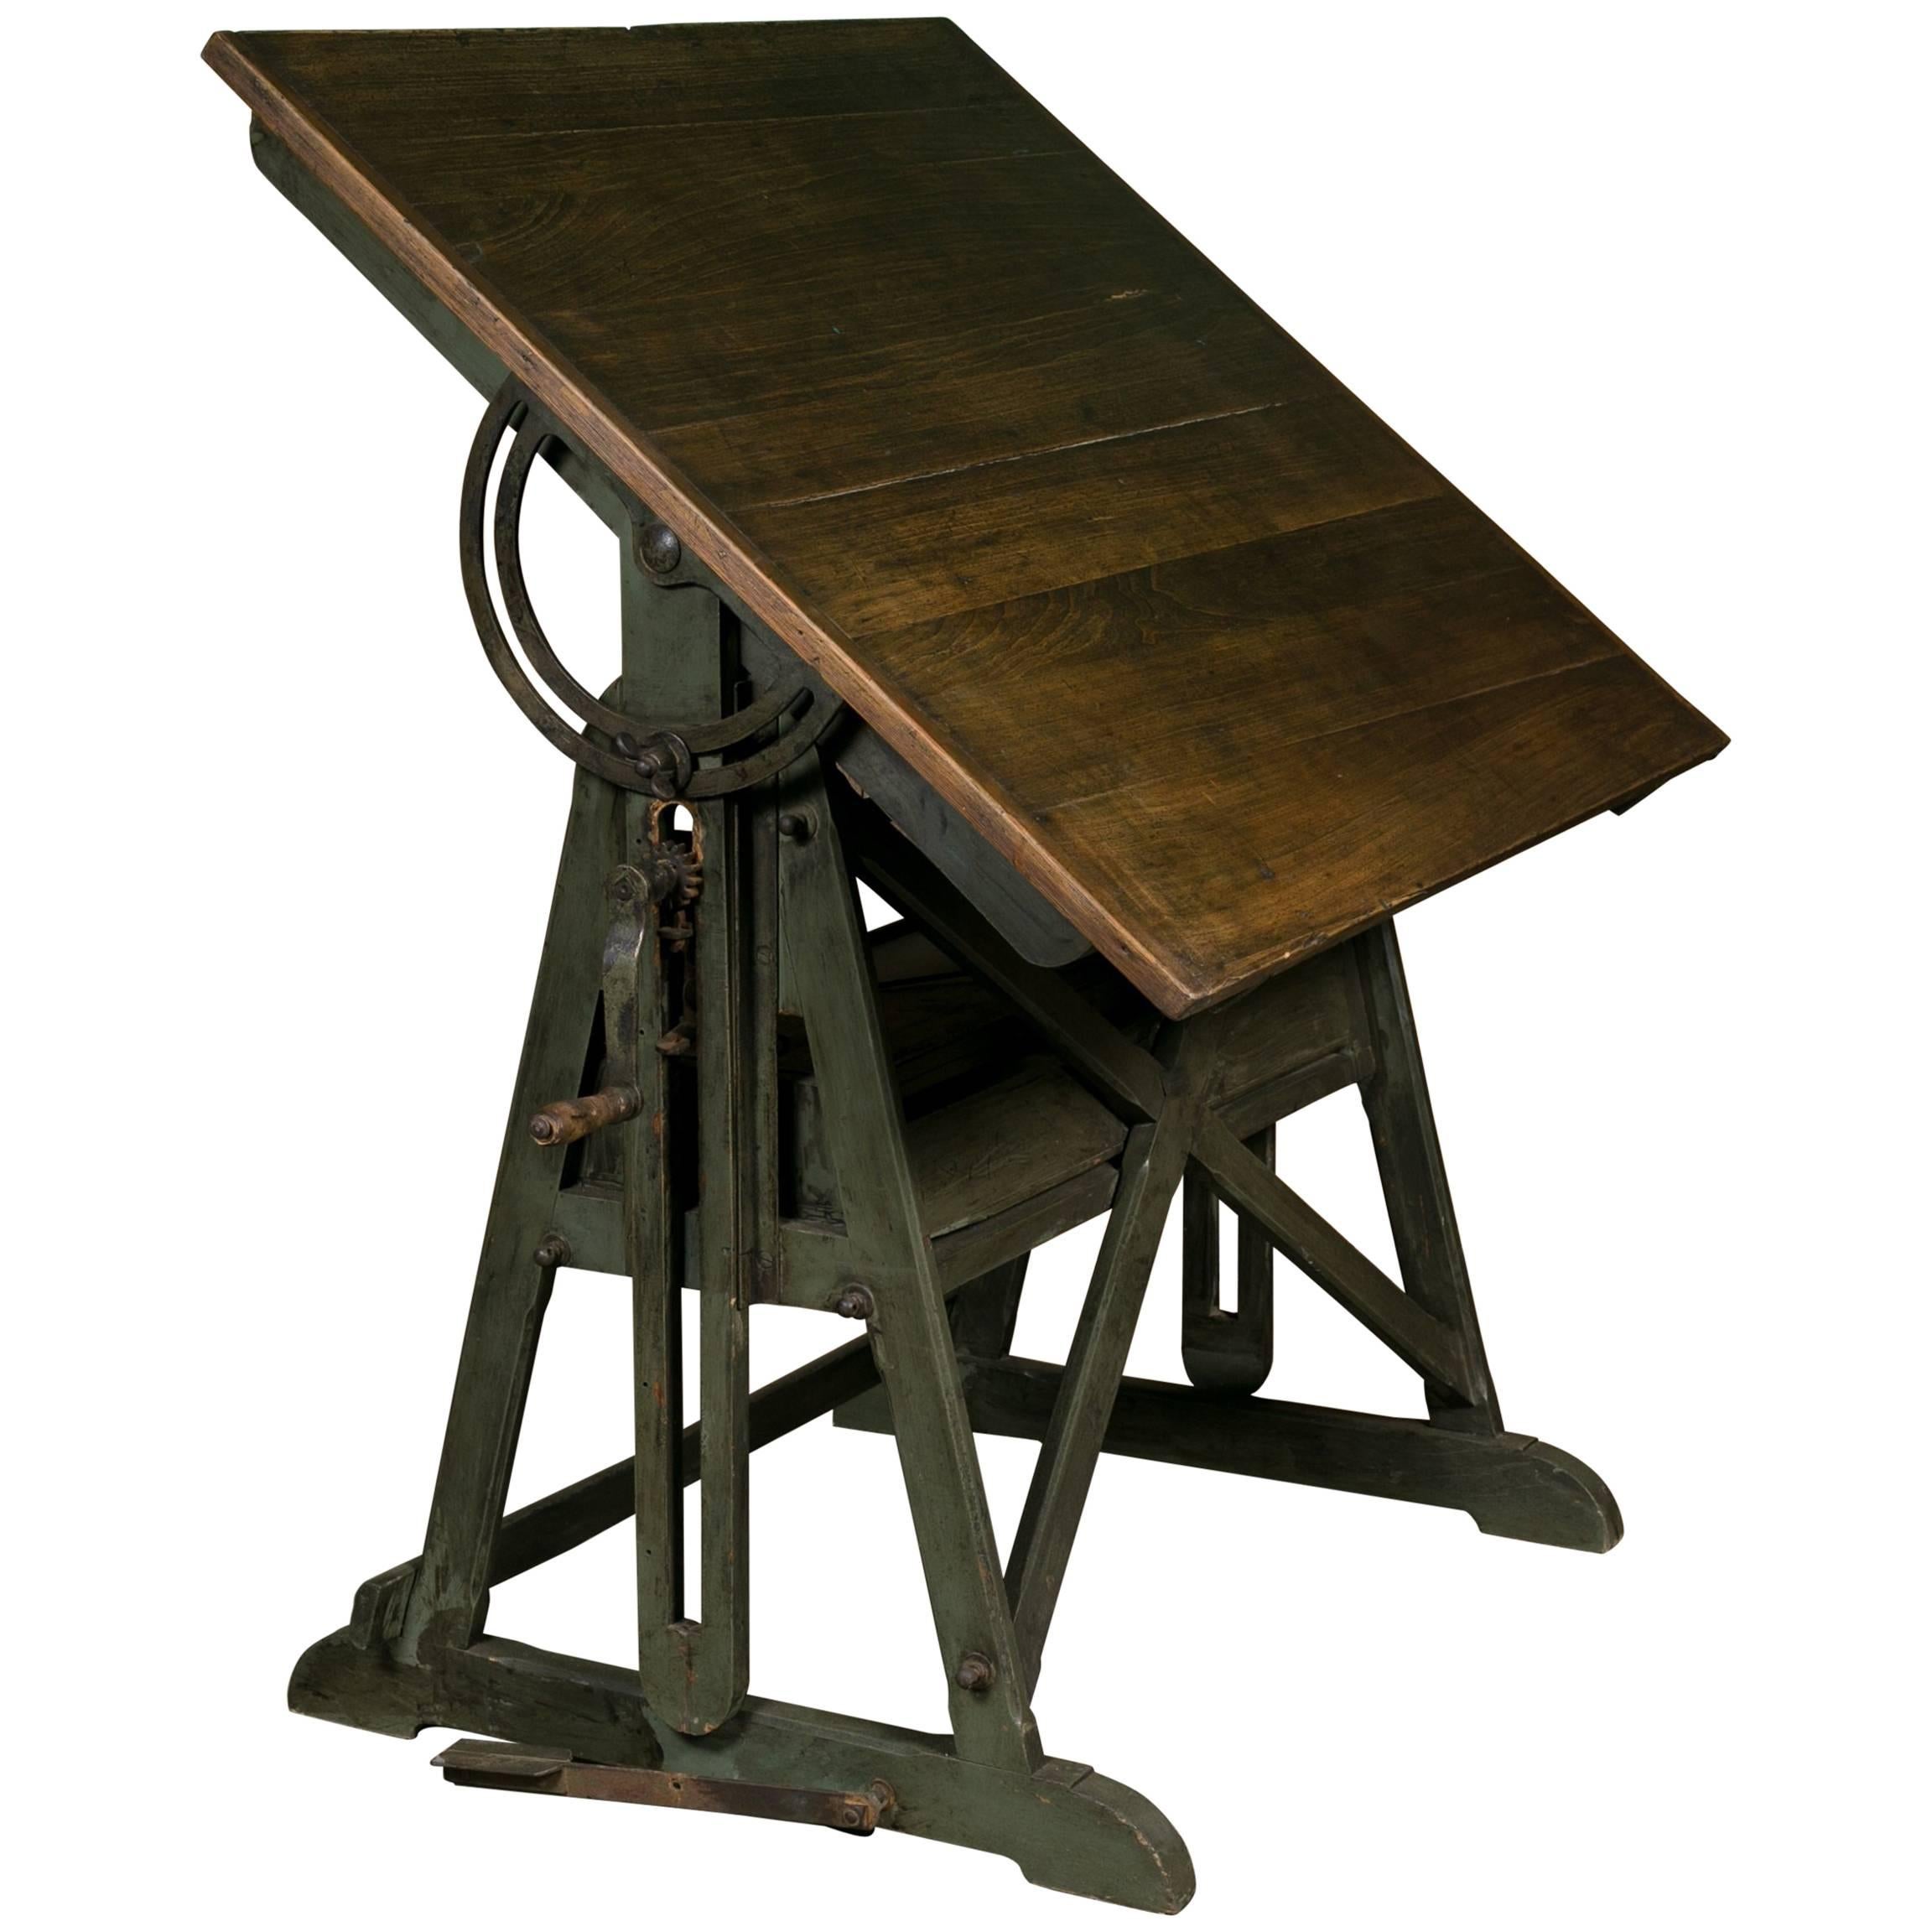 Antique Industrial Architect's Tilt Top Drafting Table from Belgium, circa 1900